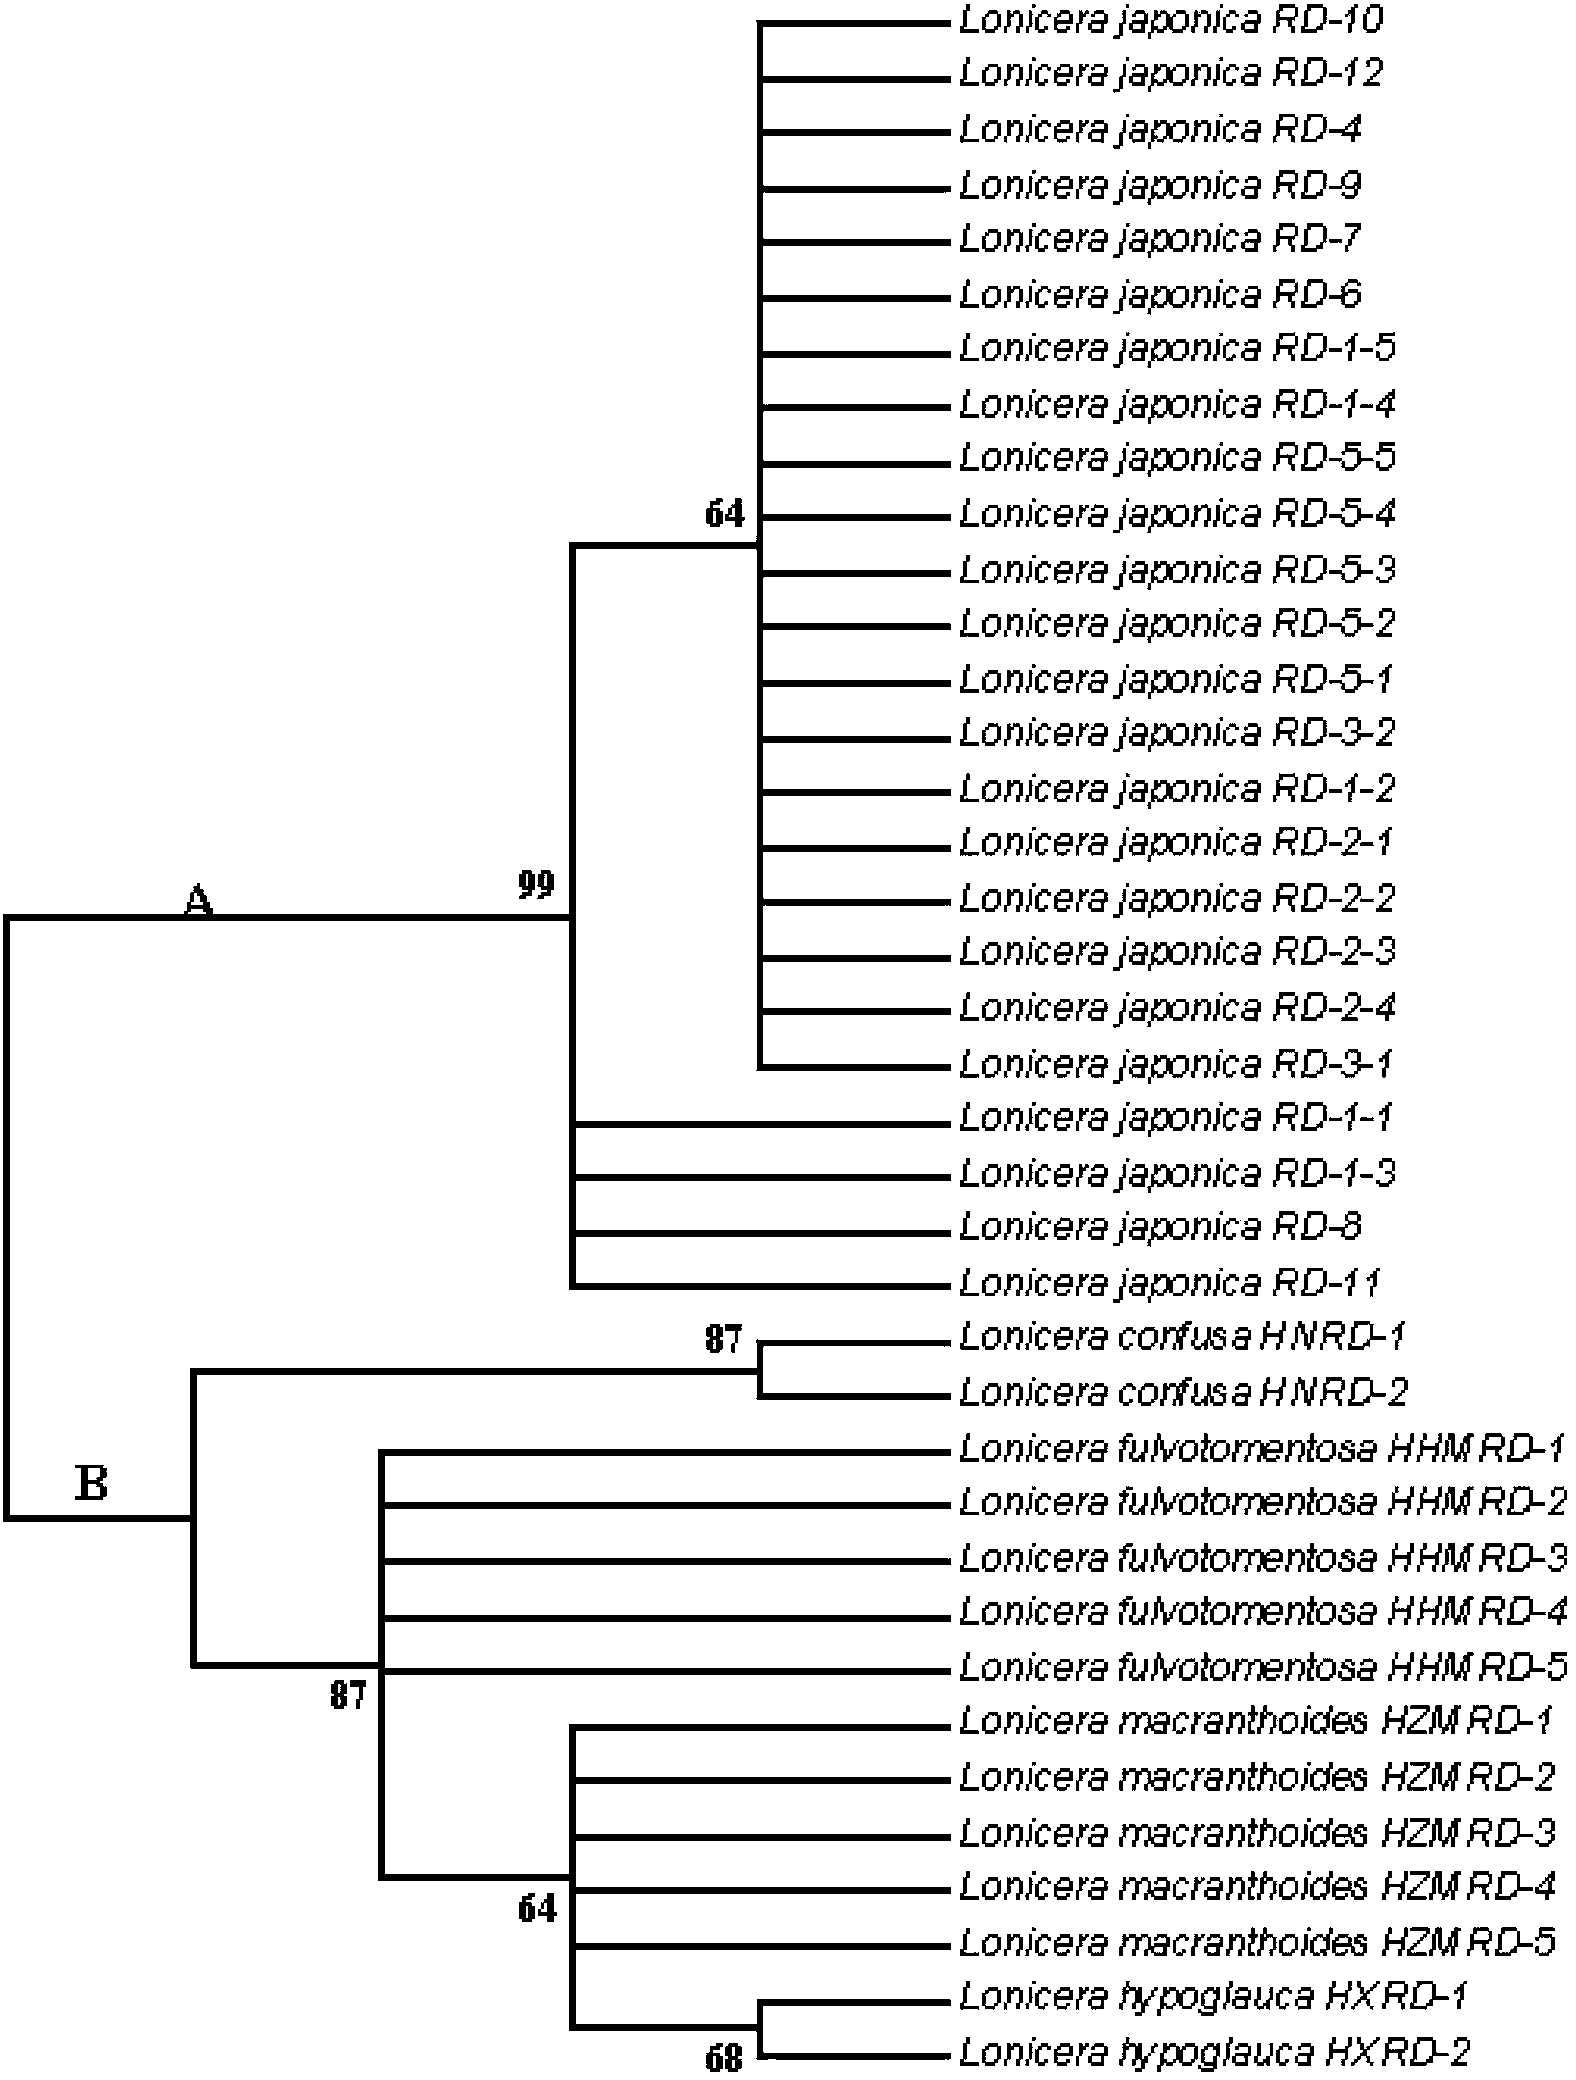 Method for identifying honeysuckle and lonicera confuse and application of same